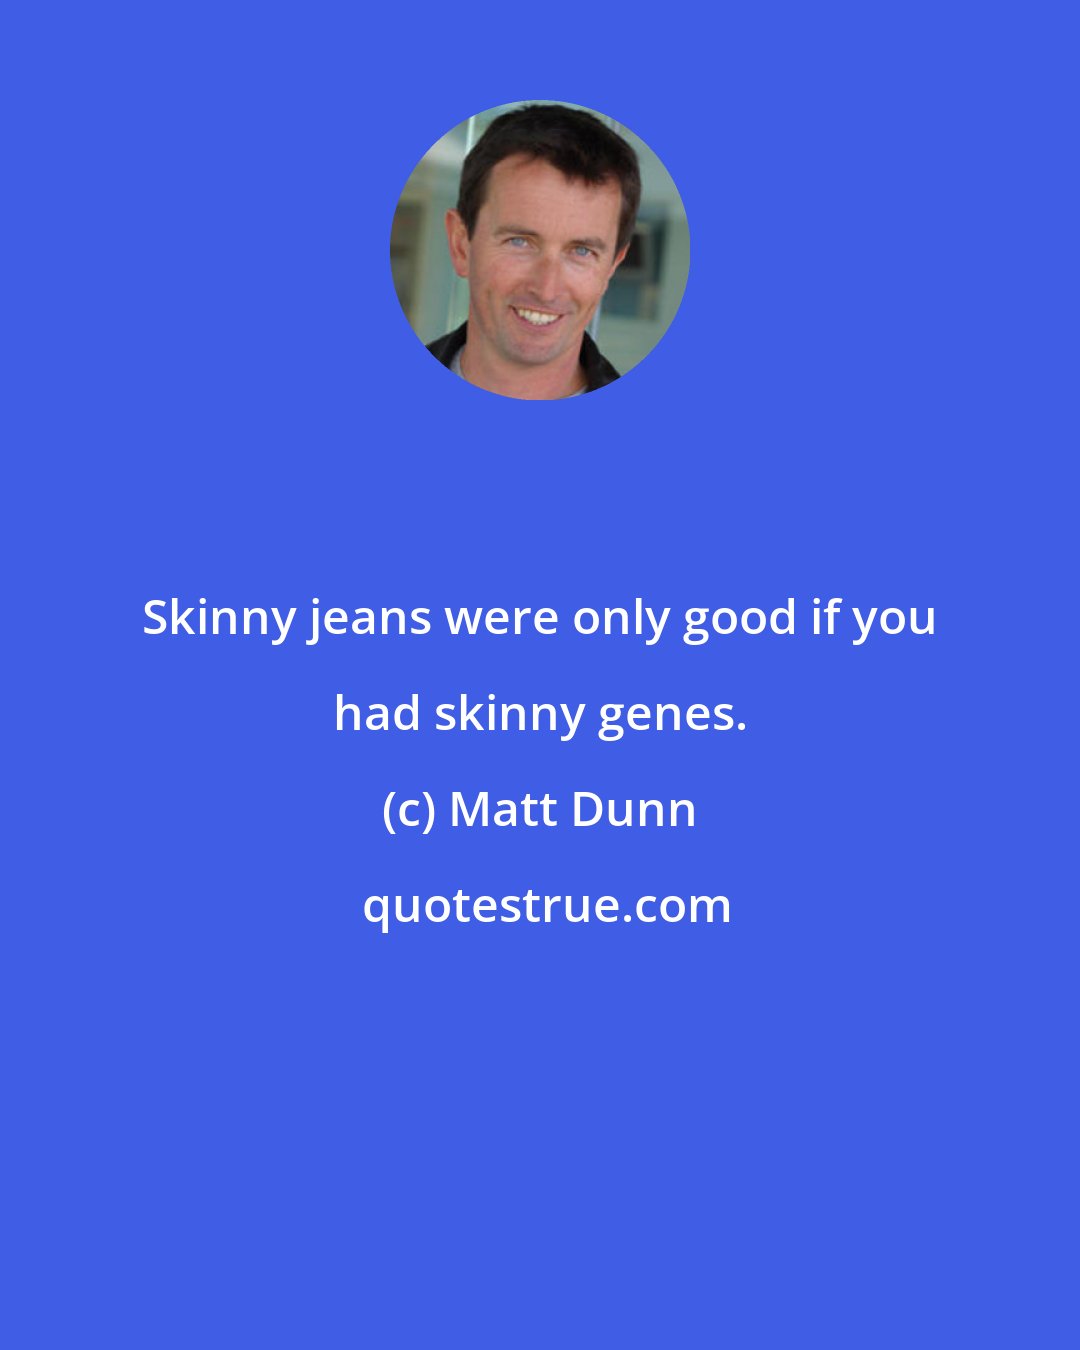 Matt Dunn: Skinny jeans were only good if you had skinny genes.